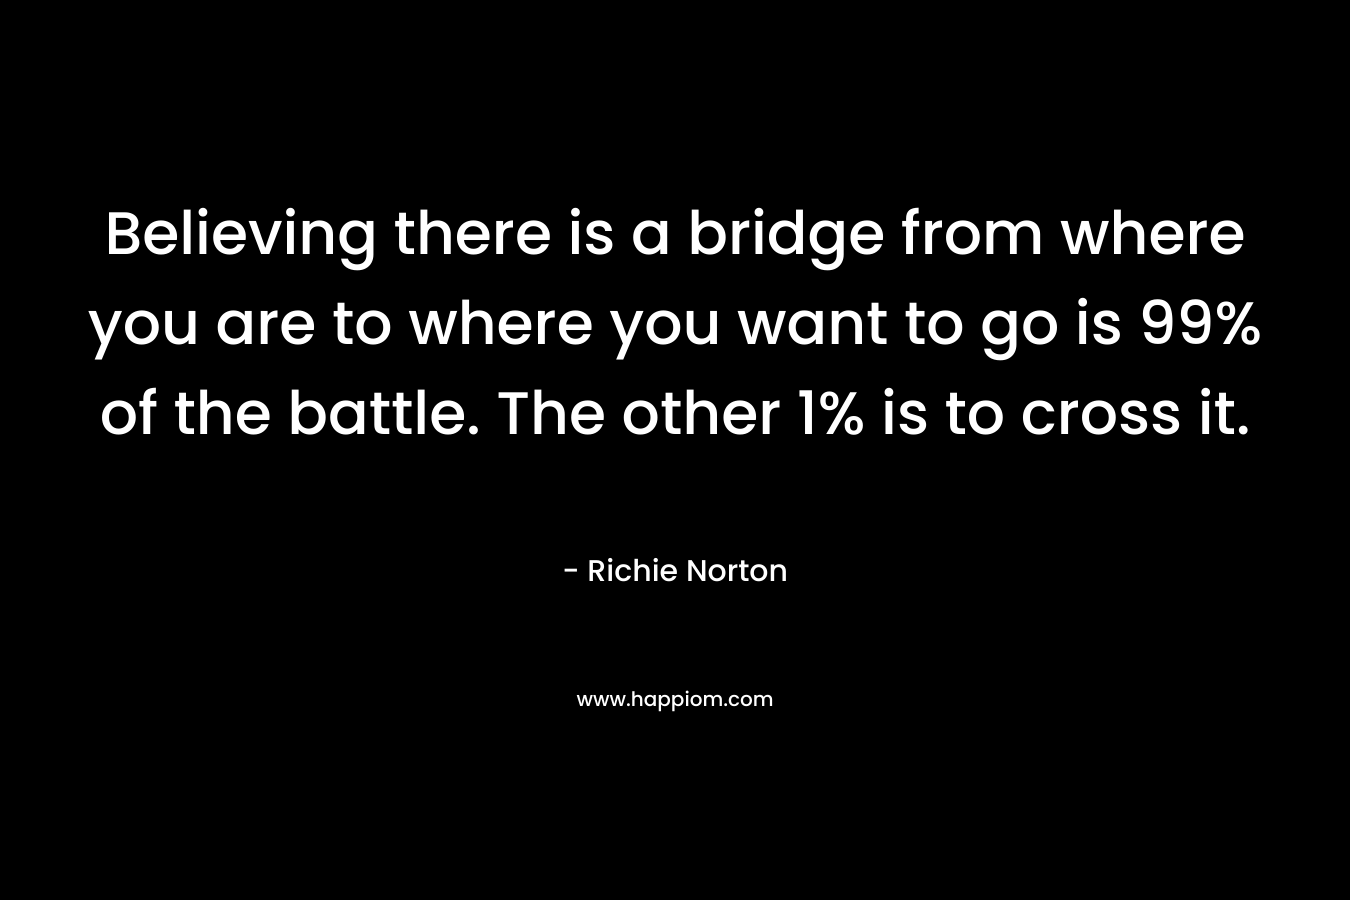 Believing there is a bridge from where you are to where you want to go is 99% of the battle. The other 1% is to cross it.